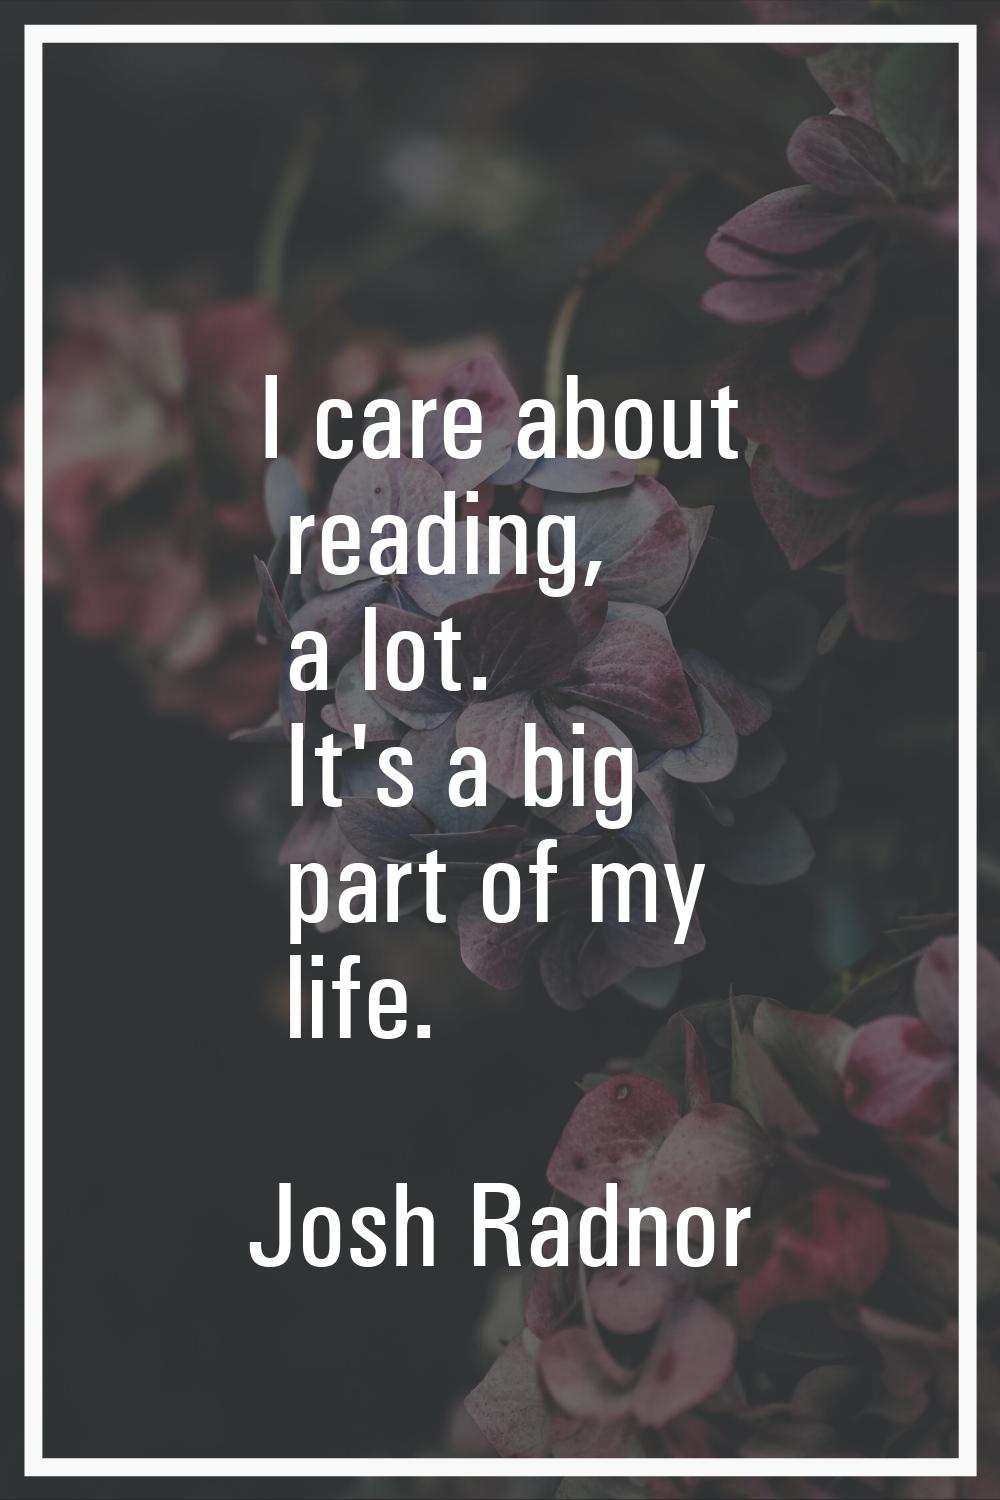 I care about reading, a lot. It's a big part of my life.